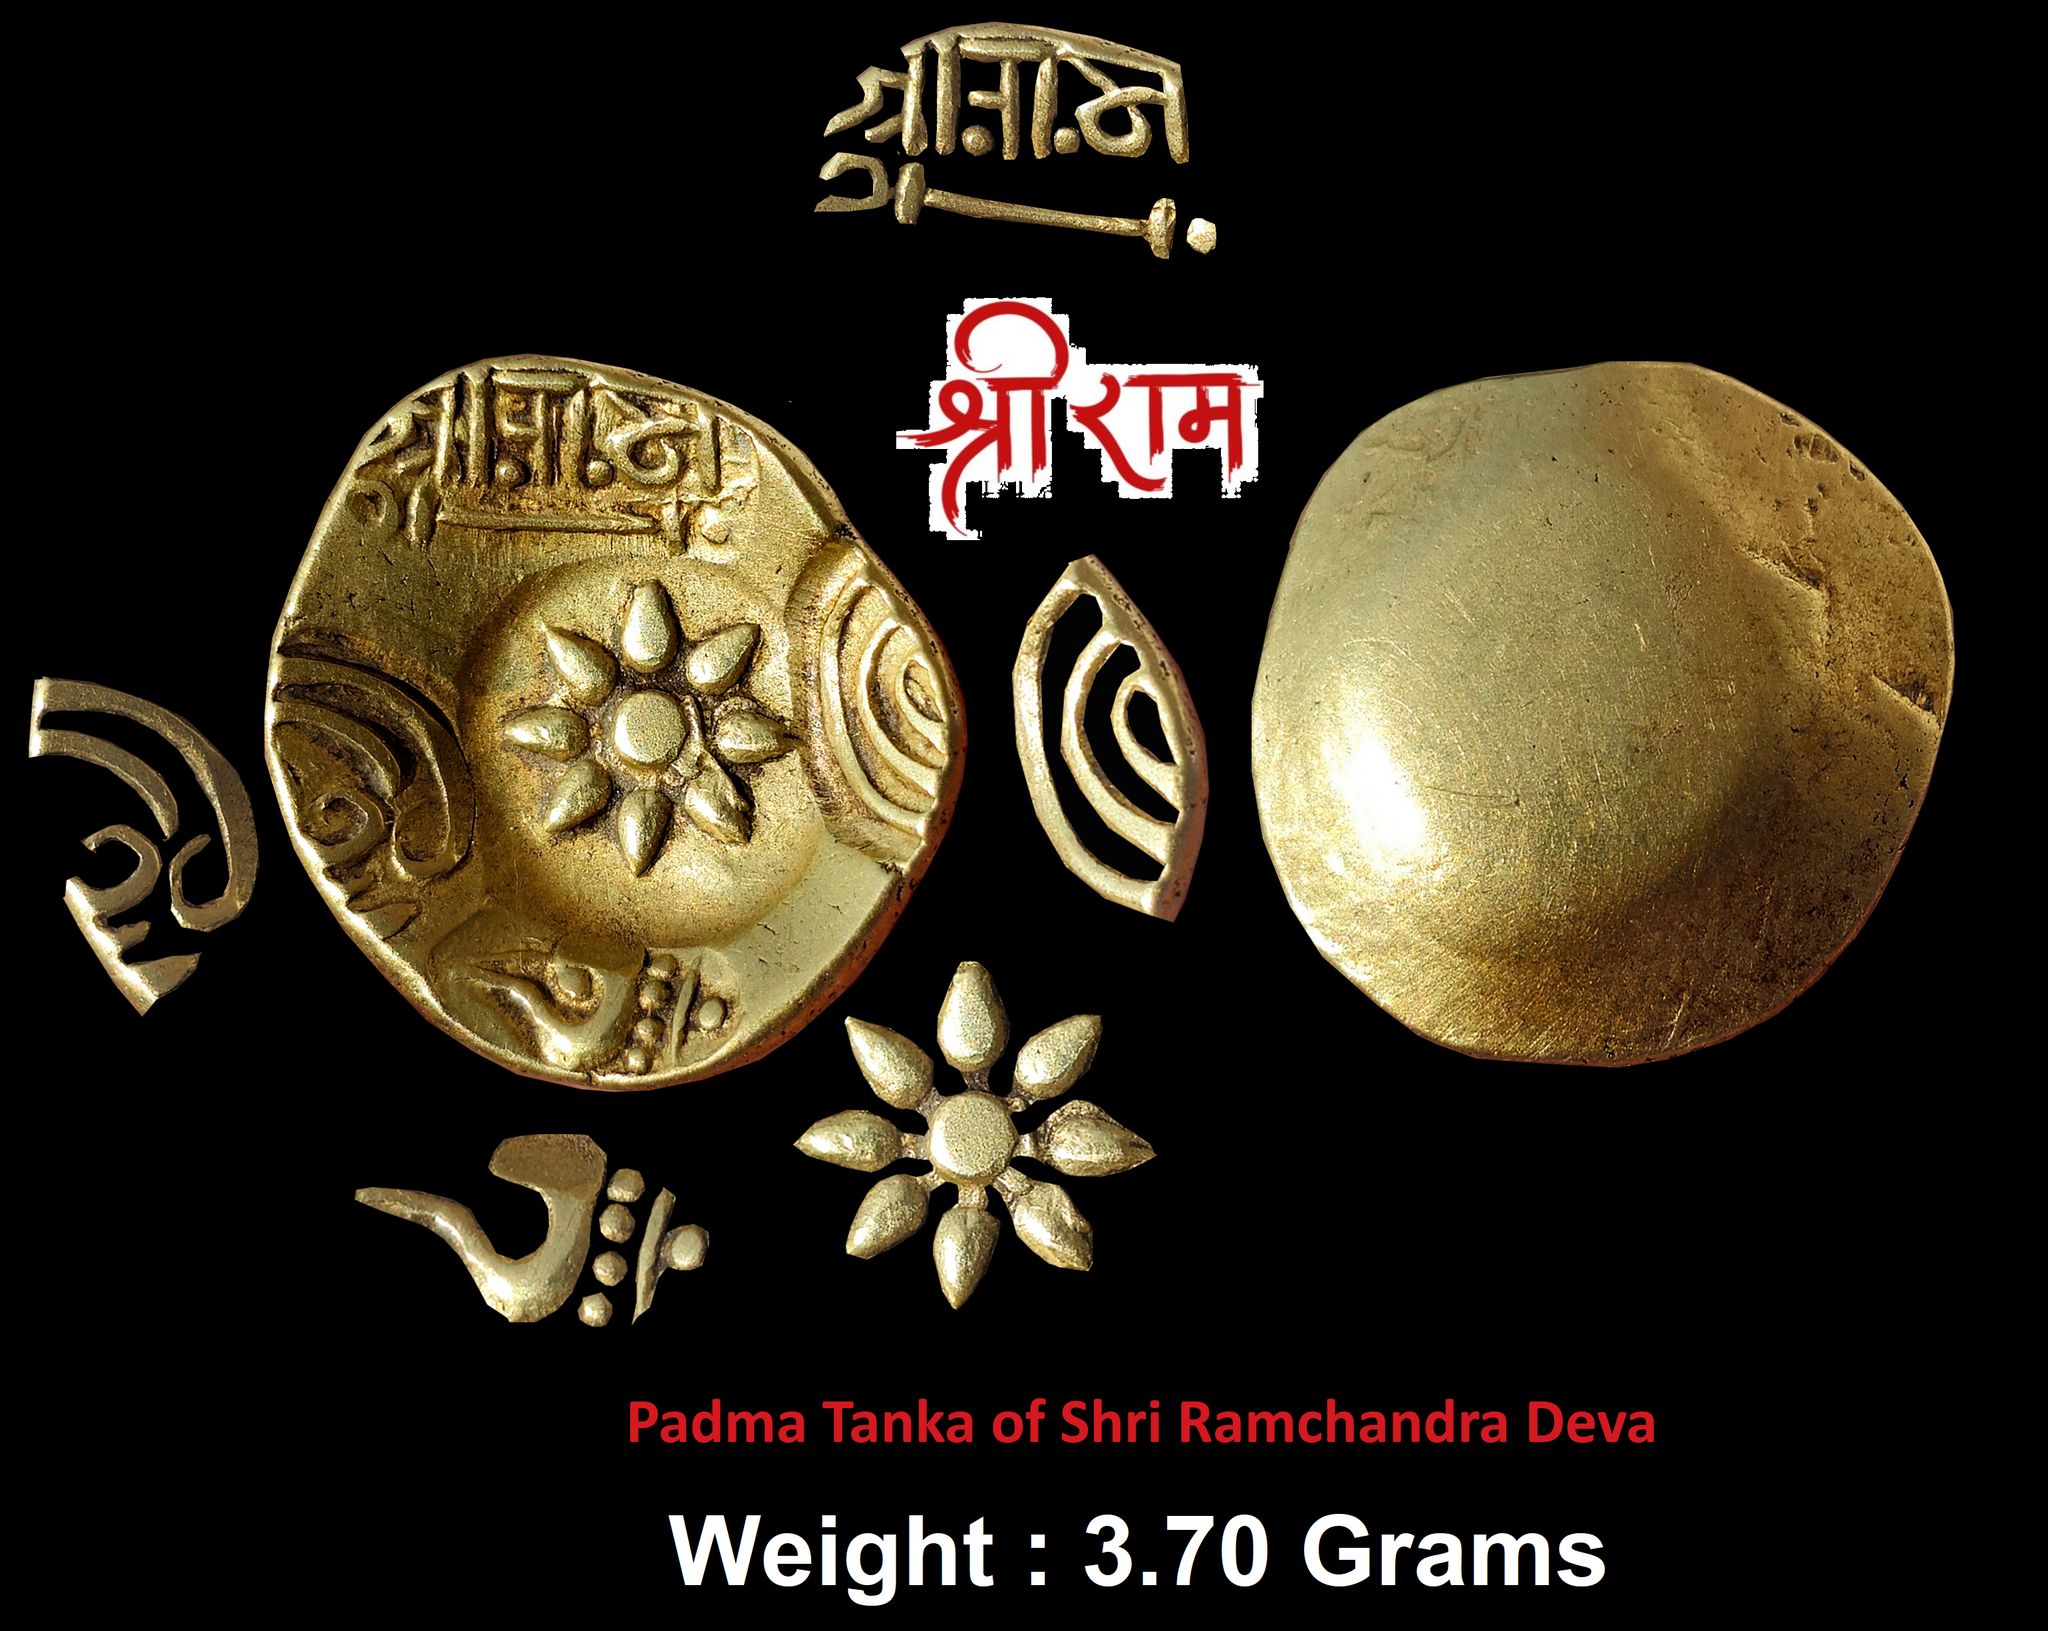 HINDU COINS OF MEDIEVAL INDIA ; Yadavas of Devagiri, Ramachandra Deva, RARE Gold Padma Tanka,
Five punches, lotus in centre, Shankha, Nagari legend Sri Rama , two punches of Shri in Kannada script (Mitch K&A 289)
Weight : 3.70 Grams
Note : Central punch of an eight-petalled Lotus flower (hence called Padma Tanka) with additional 4-punches around commencing from 12 'O' clock, "Sri Rama" (in Nagari script, with a double bladed spear / javelin below the name), "Sri", "Conch" and "Sri".

The central punch on the 'Padmatanka' coins represents a Lotus flower (Padma = Lotus, Tanka = Stamp or Punch) with its 8 outstretched petals representing "Asth-lakshmi" or the eight primary forms of the Goddess Lakshmi viz.

Adi - One with Supreme
Dhanya - Harvest
Dhairya - Inner Strength and Patience
Gaja - Elephant - wisdom
Santan - Child
Vijay - Victory
Dhana - Wealth; and
Vidya - Knowledge

"Sri" is both an honorary epithet used before a name, especially that of a ruler, as well as refers to Laxmi, Goddess of Wealth.
The "conch" symbol is usually associated with the God Vishnu, of whom Laxmi is the consort.

By placing his name alongside the various attributes/symbols of the Gods, the King is invoking a symbolic parallelism of his right to rule with the blessings of the Gods as the King's name "Sri Rama or Ramadeva" evokes the legendary Lord Rama, an avtar of Vishnu.
In 1294, Ala-ud-din Khilji of the Delhi Sultanate captured Devagiri. Khilji restored it to Ramachandra in return for his promise of payment of a high ransom that included 600 maunds of pearls, two maunds of Diamonds, rubies, emeralds and sapphires (One maund was around 40 Kilograms), and an annual tribute. However, the tribute was not paid and the Seuna kingdom's arrears to Khilji kept mounting. In 1307, Khilji sent an army commanded by Malik Kafur, accompanied by Khwaja Haji, to Devagiri. The Muslim governors of Malwa and Gujarat were ordered to help Malik Kafur. Their huge army conquered the weakened and defeated forces of Devagiri almost without a battle. Ramachandra was taken to Delhi. Khilji reinstated Ramachandra as governor and was given the title "Rai Rayan" (king of kings), in return for a promise to help him subdue the Hindu kingdoms in South India. In 1310, Malik Kafur mounted an assault on the Kakatiya kingdom from Devagiri.